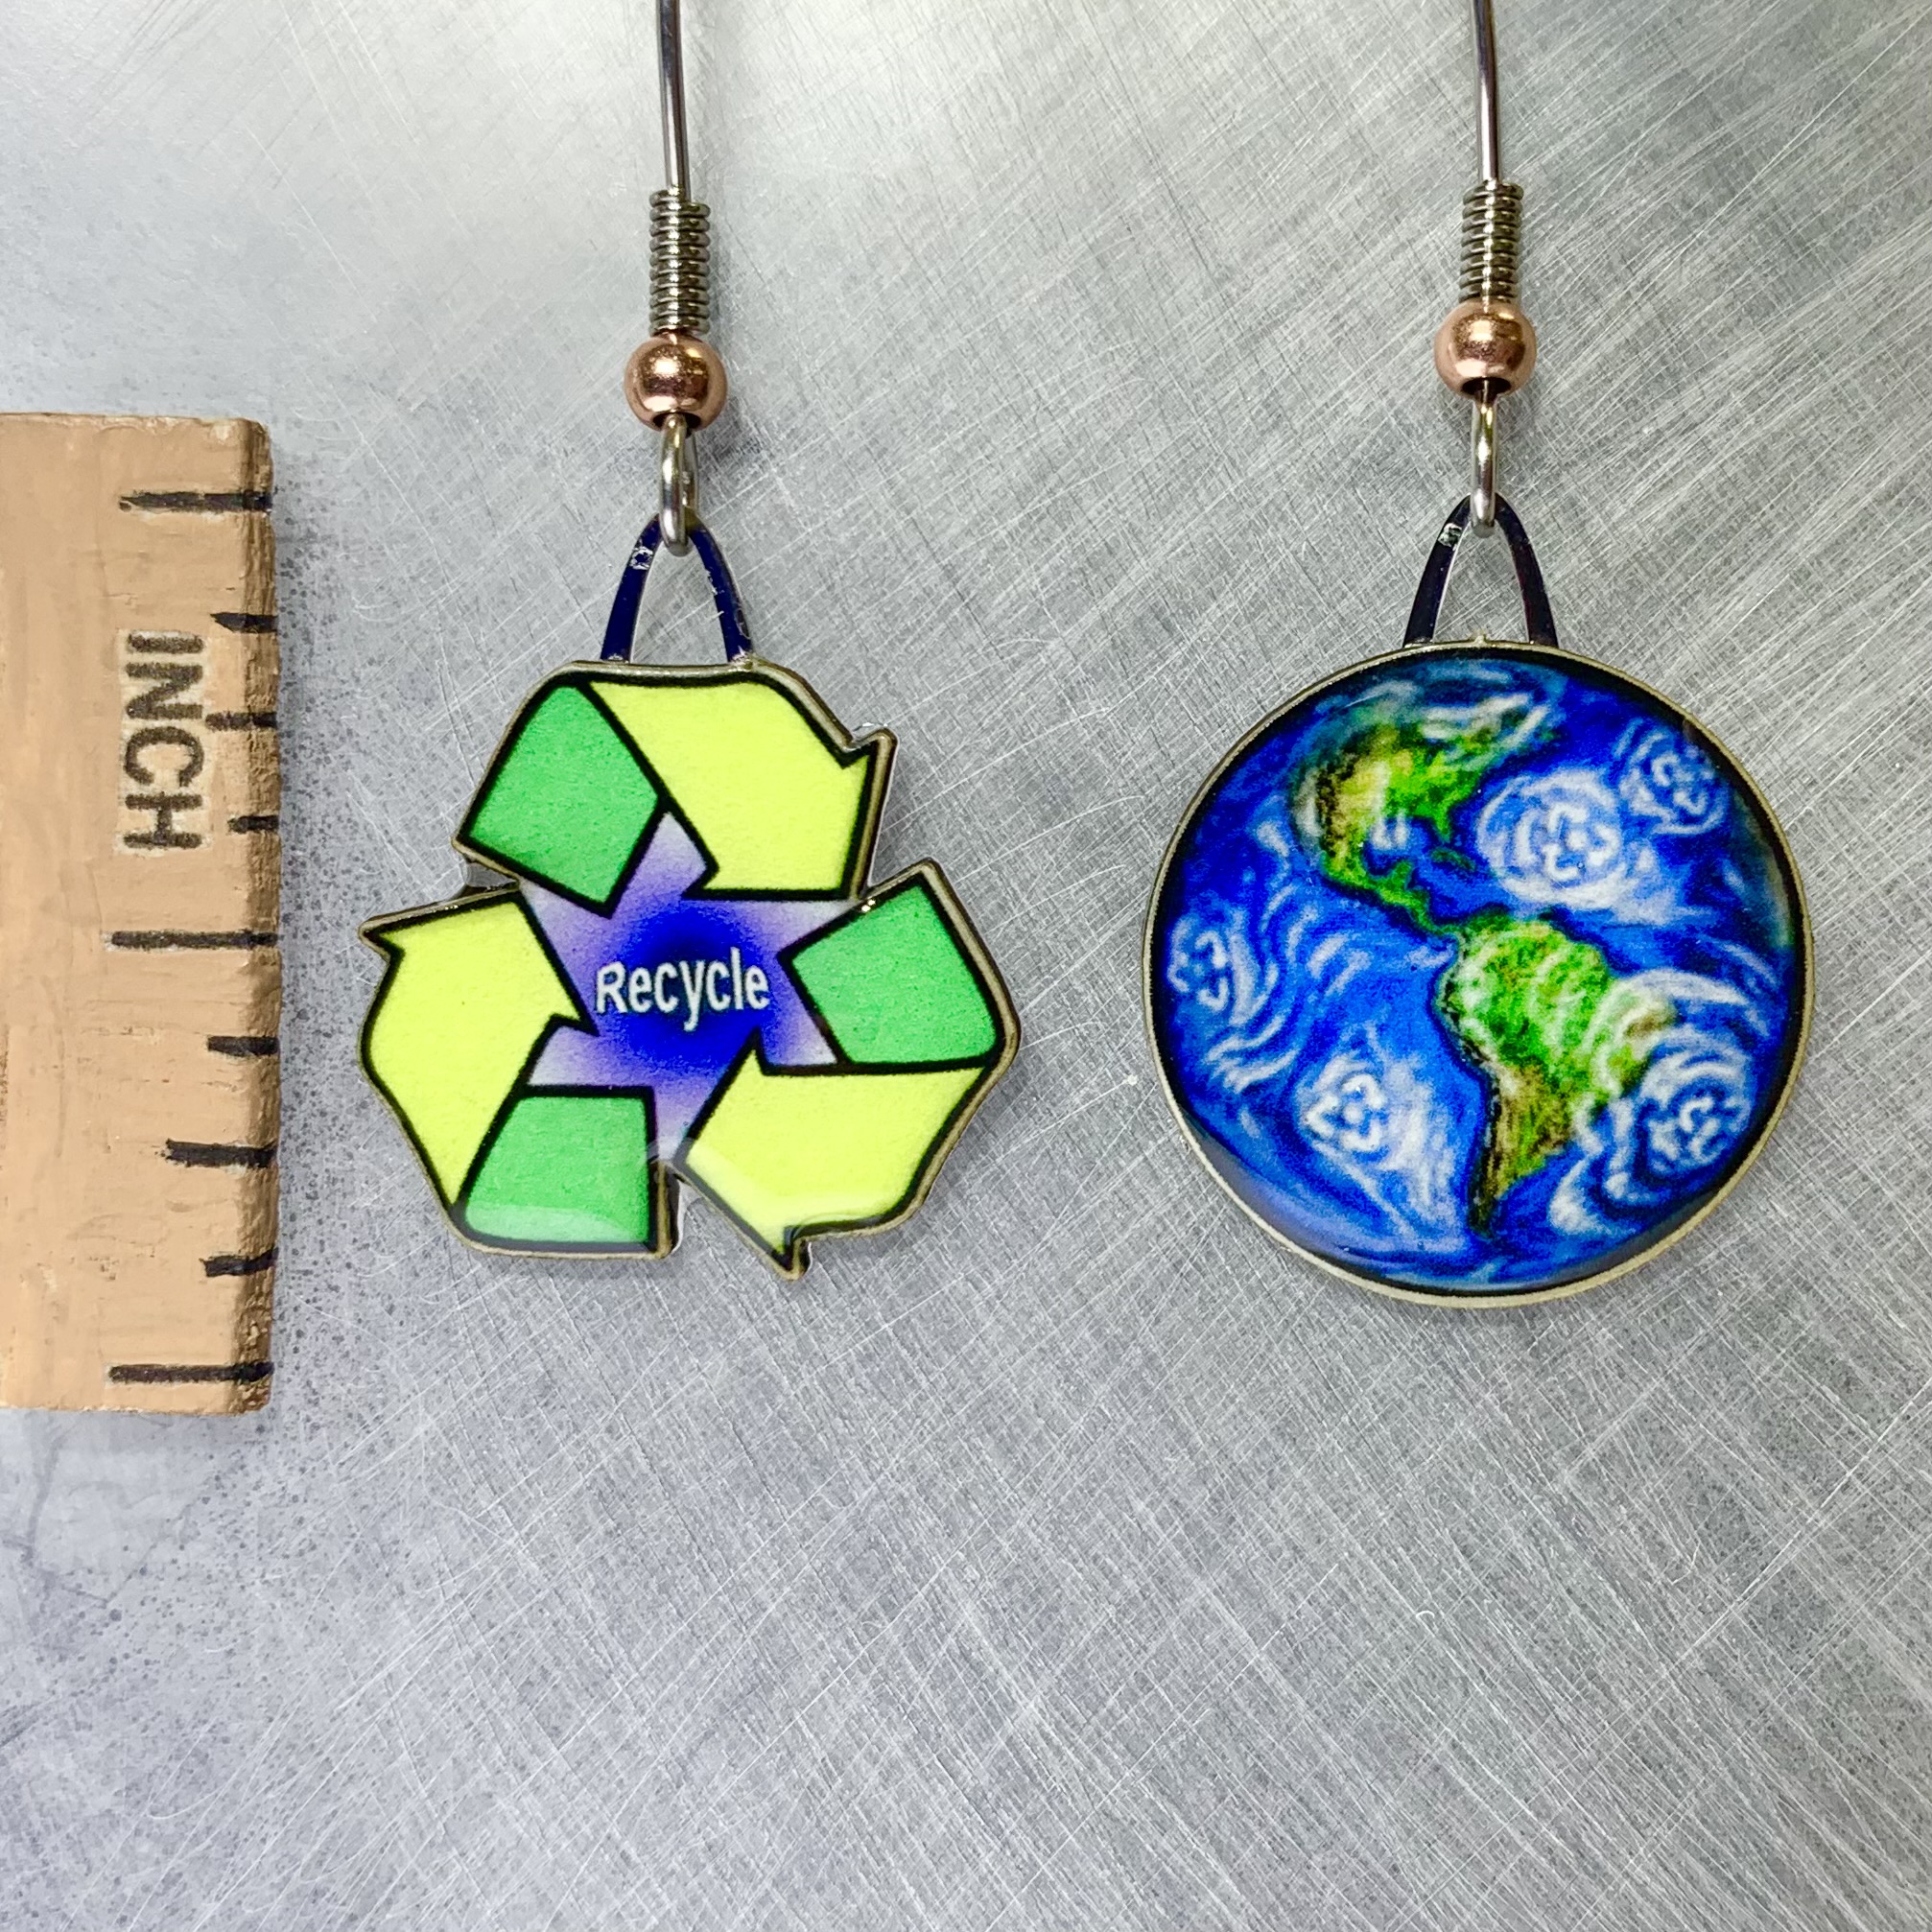 Picture shown is of 1 inch tall pair of earrings of Reduce, Reuse, Recycle.